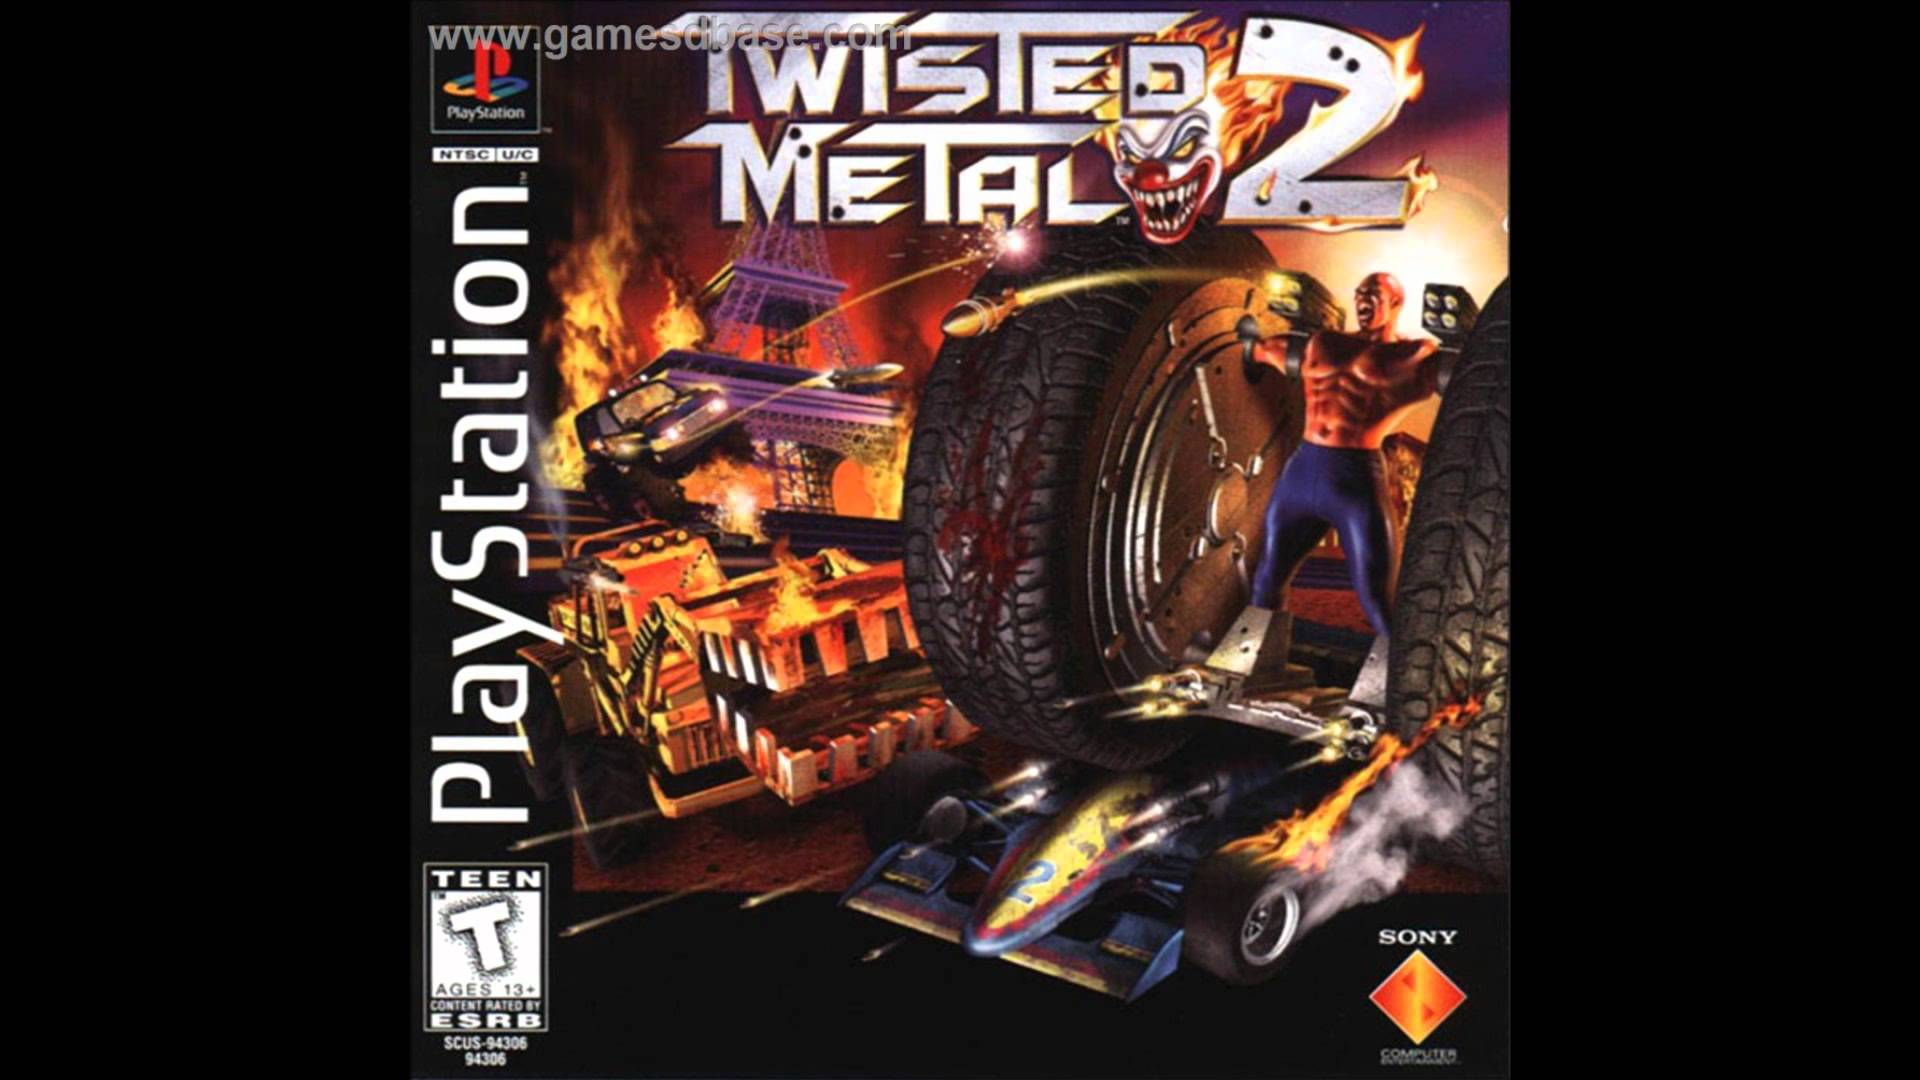 Twisted Metal 2: Full Game Soundtrack